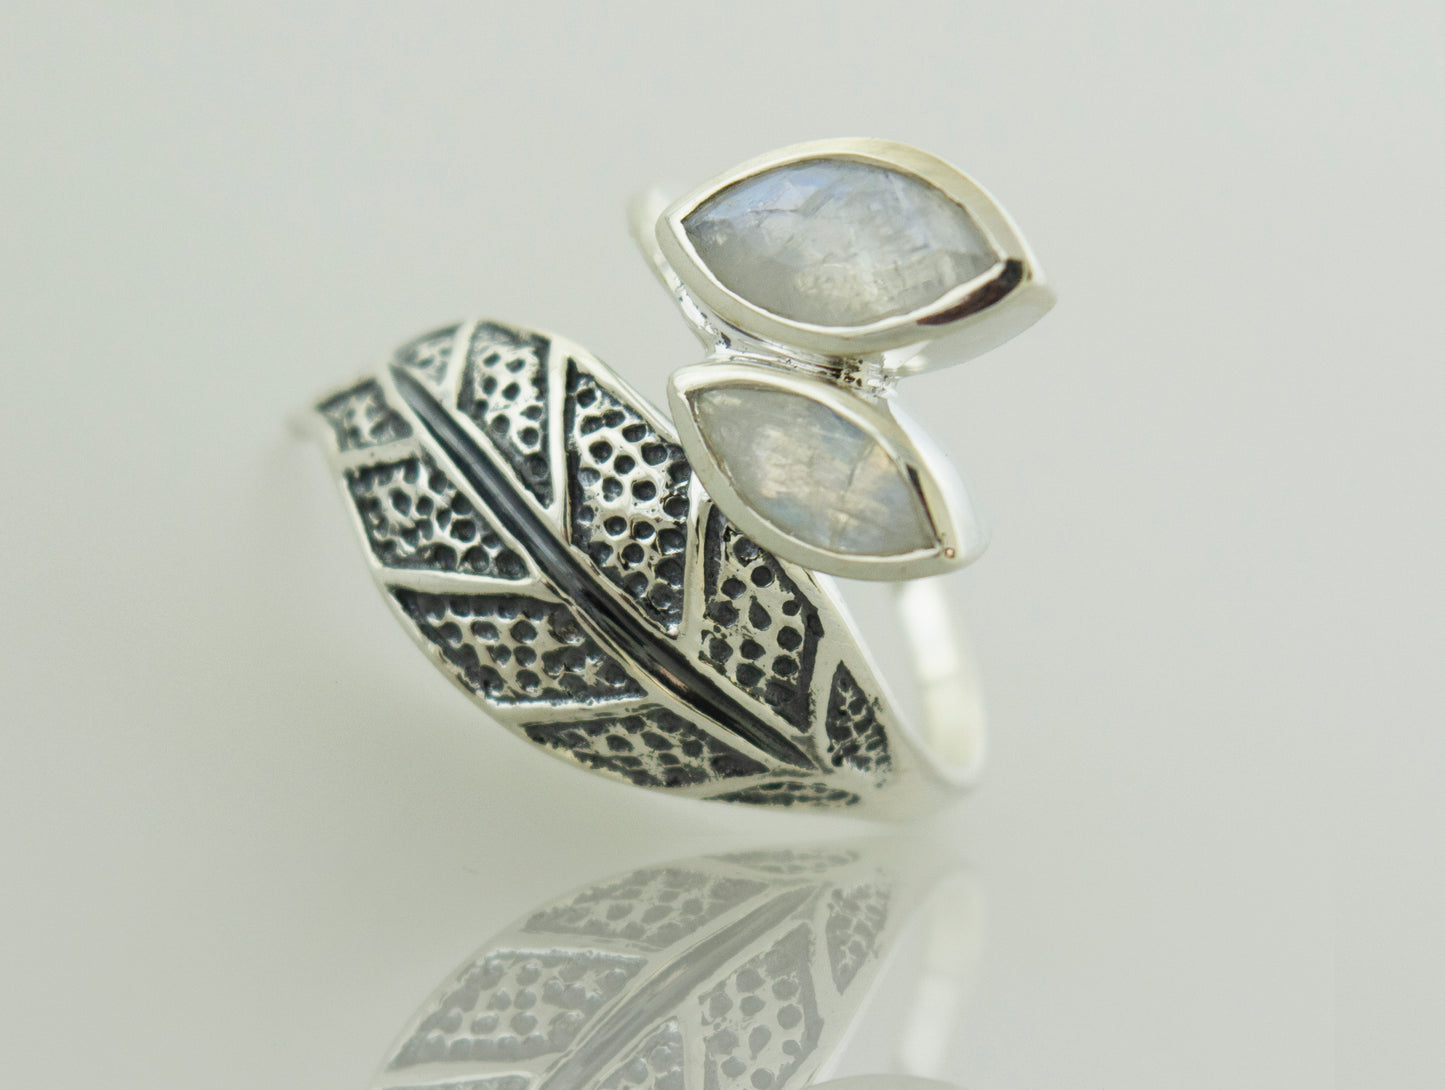 A Super Silver wrap-around Leaf Ring with Moonstone.